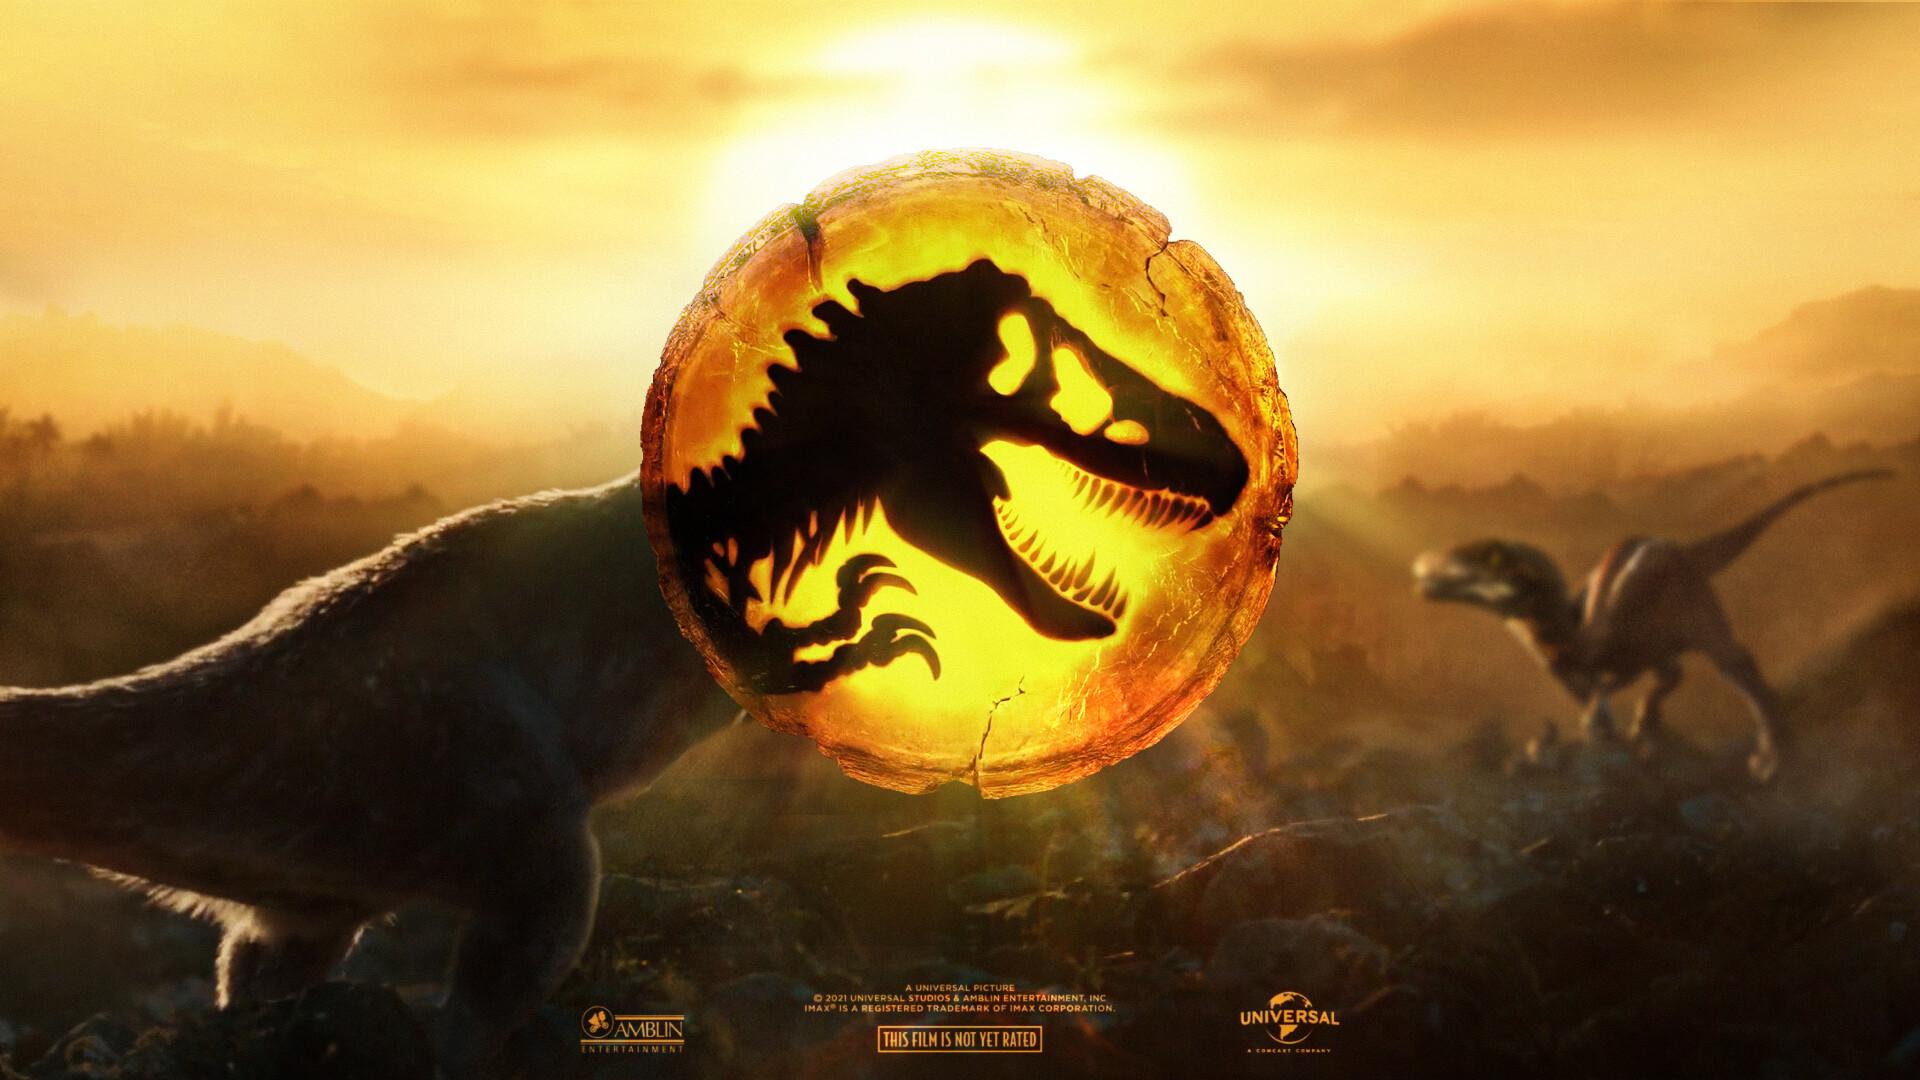 free Jurassic World: Dominion for iphone instal